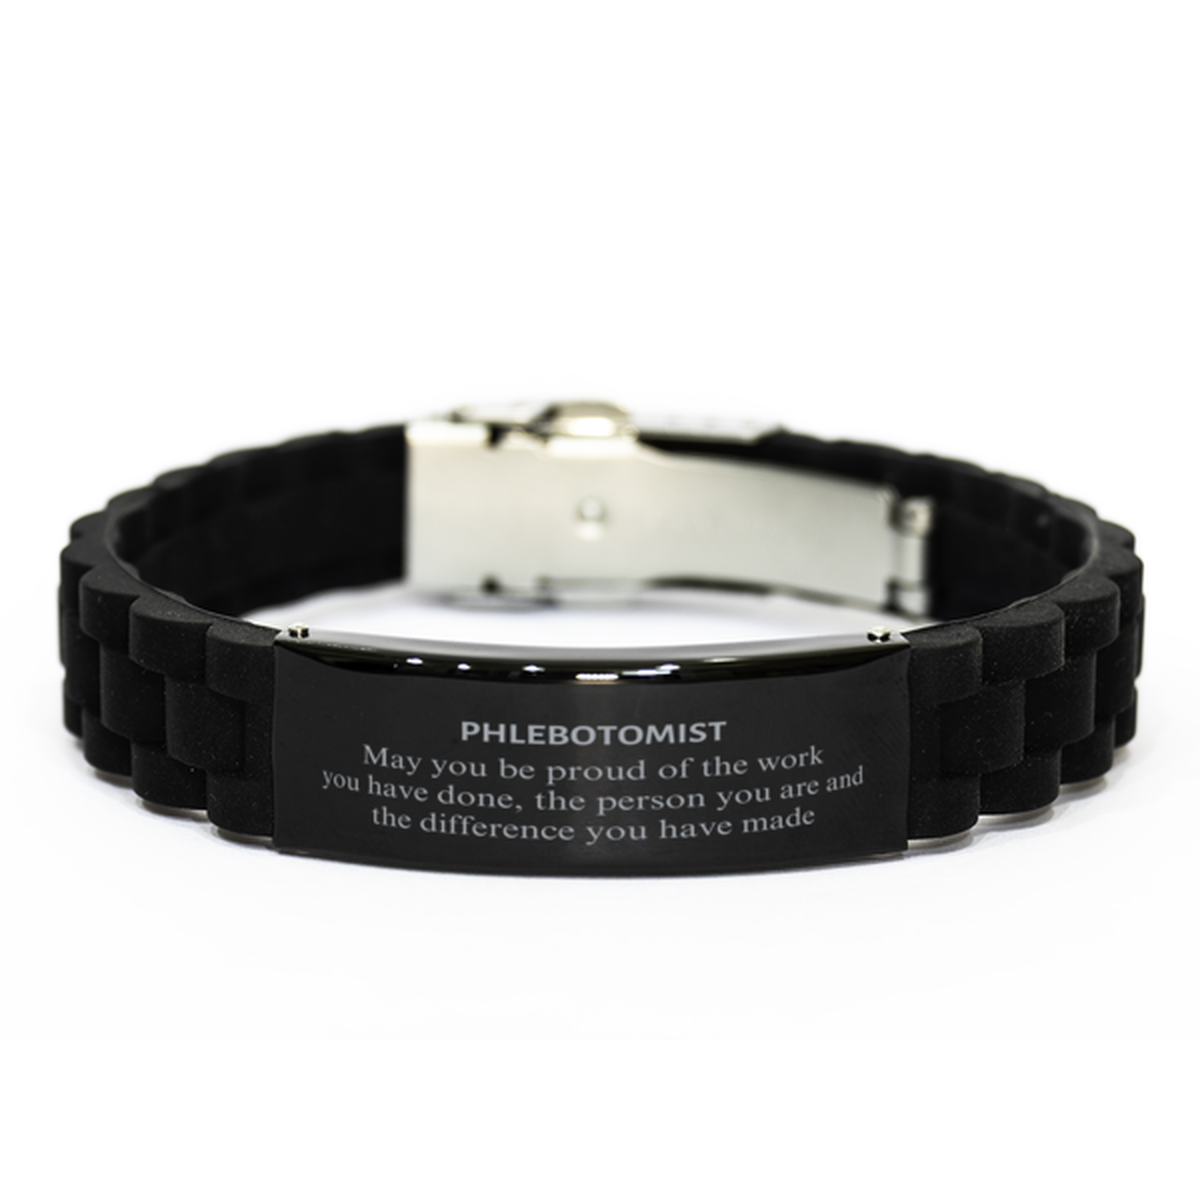 Phlebotomist May you be proud of the work you have done, Retirement Phlebotomist Black Glidelock Clasp Bracelet for Colleague Appreciation Gifts Amazing for Phlebotomist